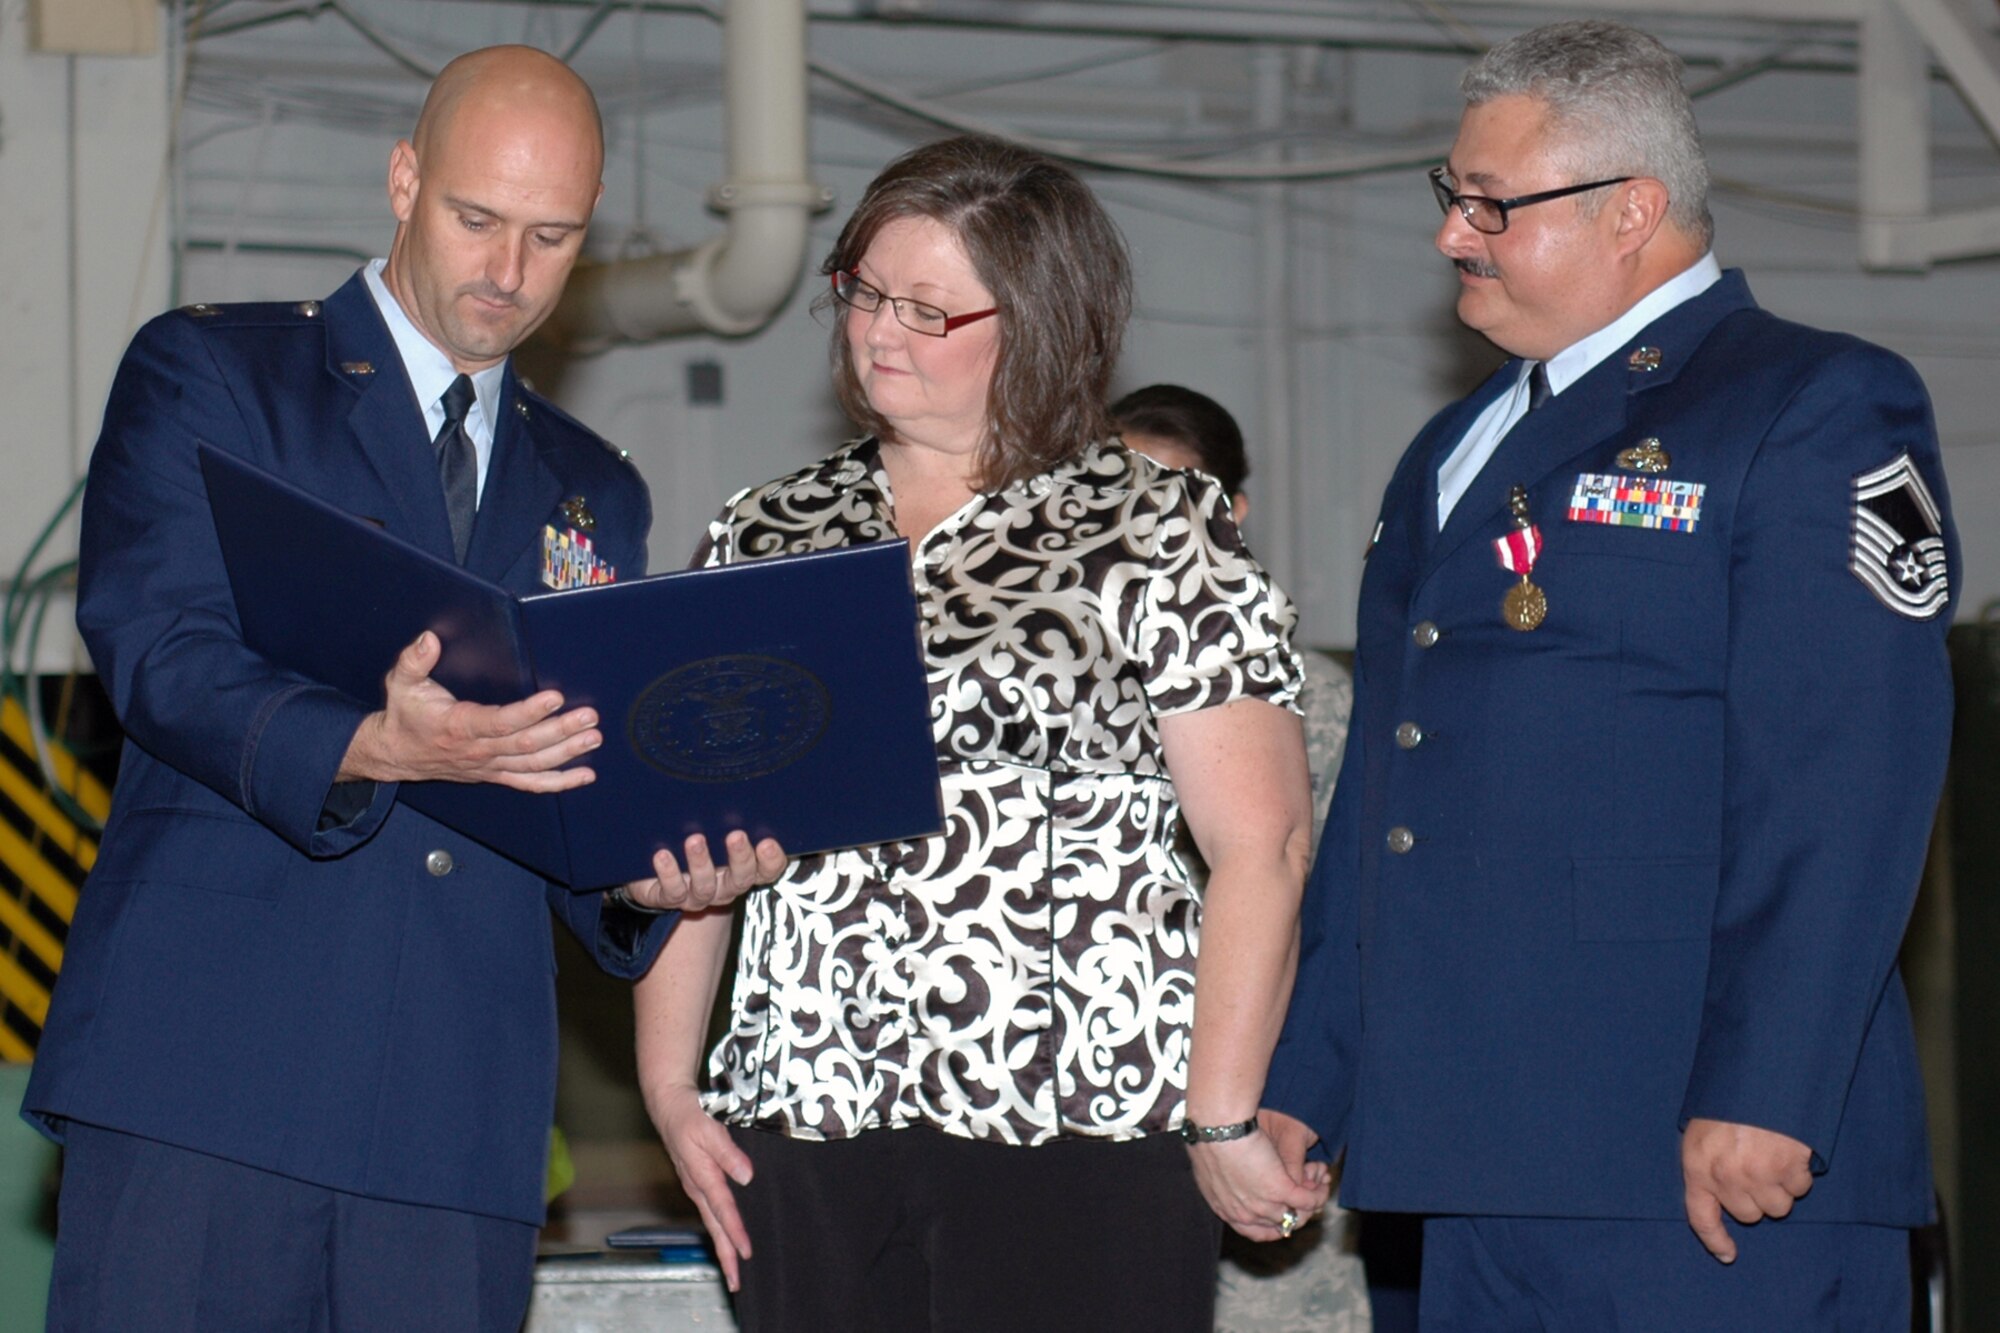 Capt. Brian Plauche, maintenance officer, 917th Maintenance Group, presents Suzanne Delgado the “Spouses Certificate of Appreciation” upon the retirement of her husband, Senior Master Sgt. Ruben Delgado, aircraft fabrication superintendent for the 917th Maintenance Squadron at Barksdale Air Force Base, La., Dec. 4, 2010. Sergeant Delgado retired from the 917th Wing after 27 years of service. (U.S. Air Force Photo/Master Sgt. Mary Hinson)